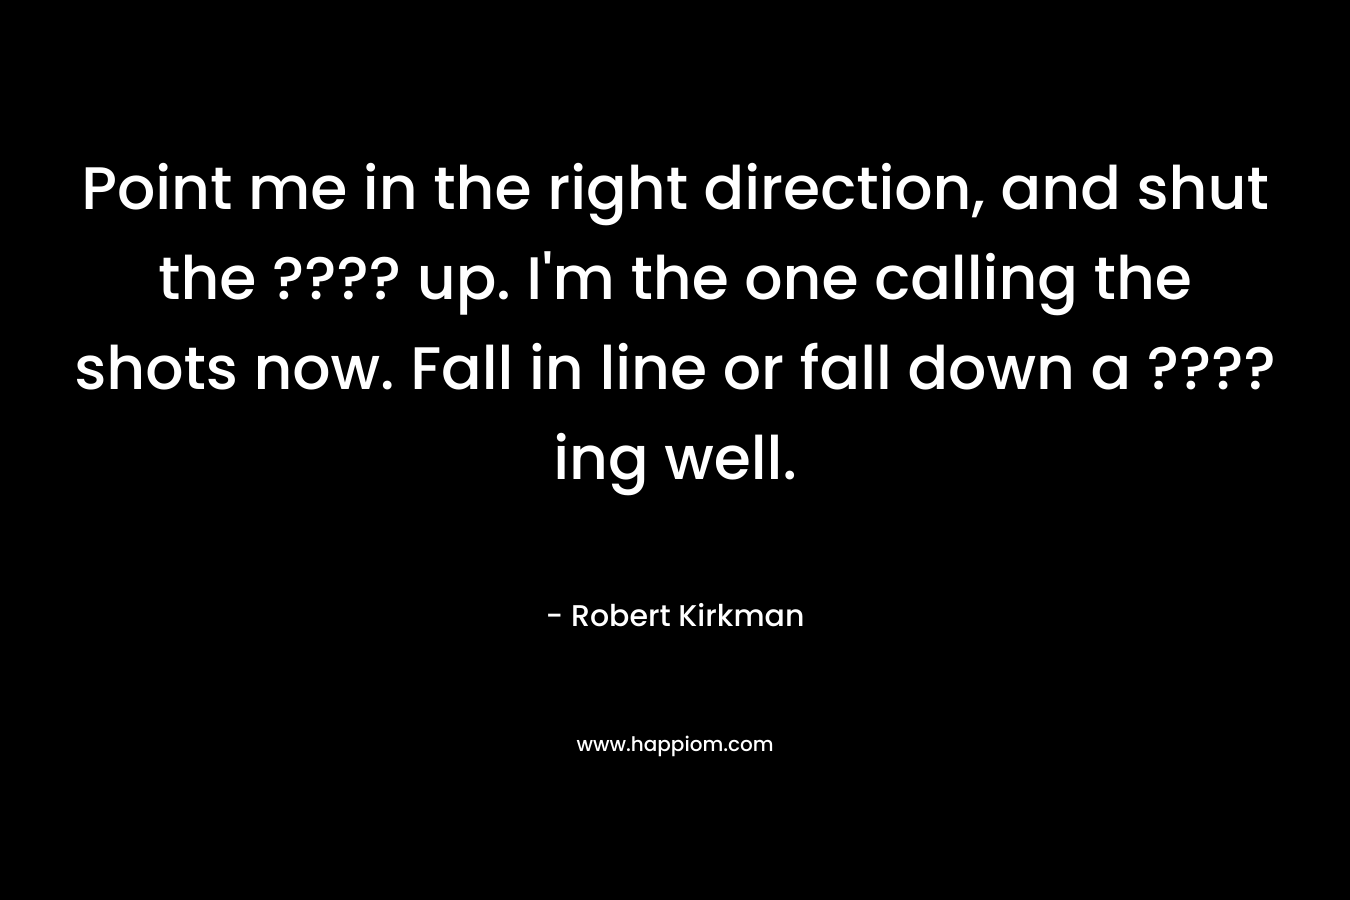 Point me in the right direction, and shut the ???? up. I’m the one calling the shots now. Fall in line or fall down a ????ing well. – Robert Kirkman